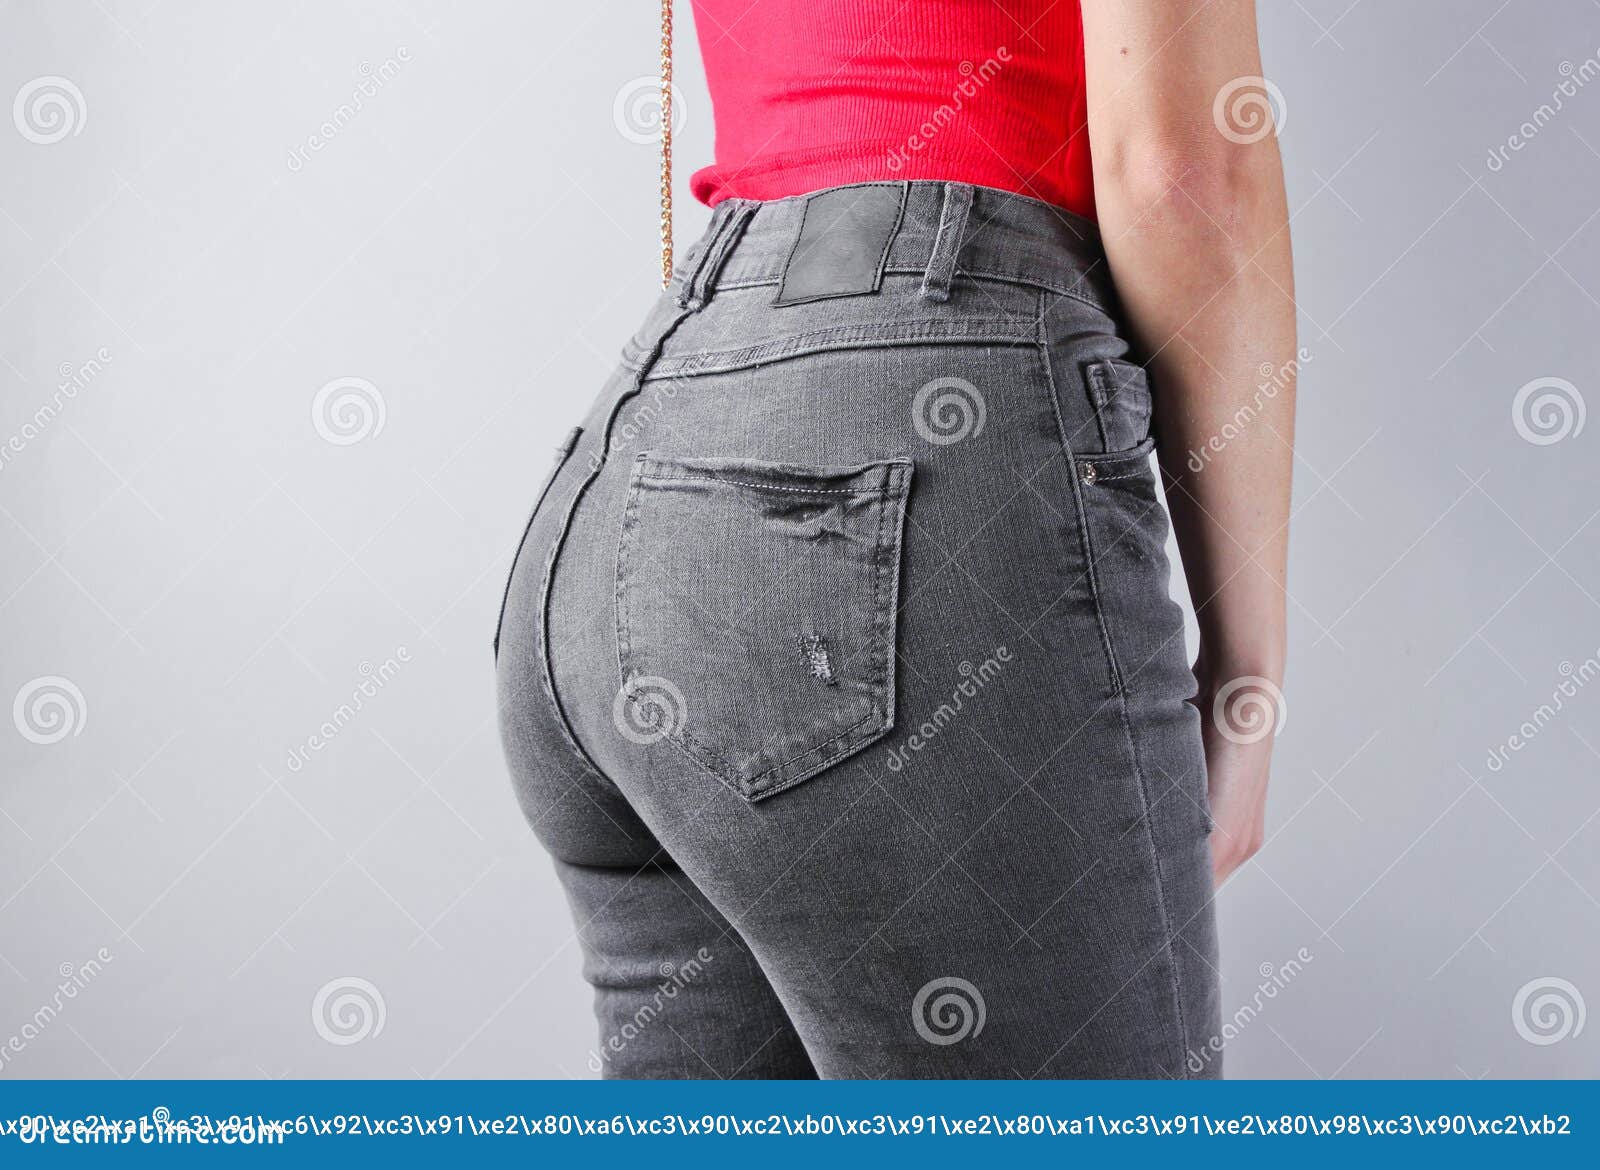 Hot butt in jeans 369 Sexy Female Butt Jeans Photos Free Royalty Free Stock Photos From Dreamstime